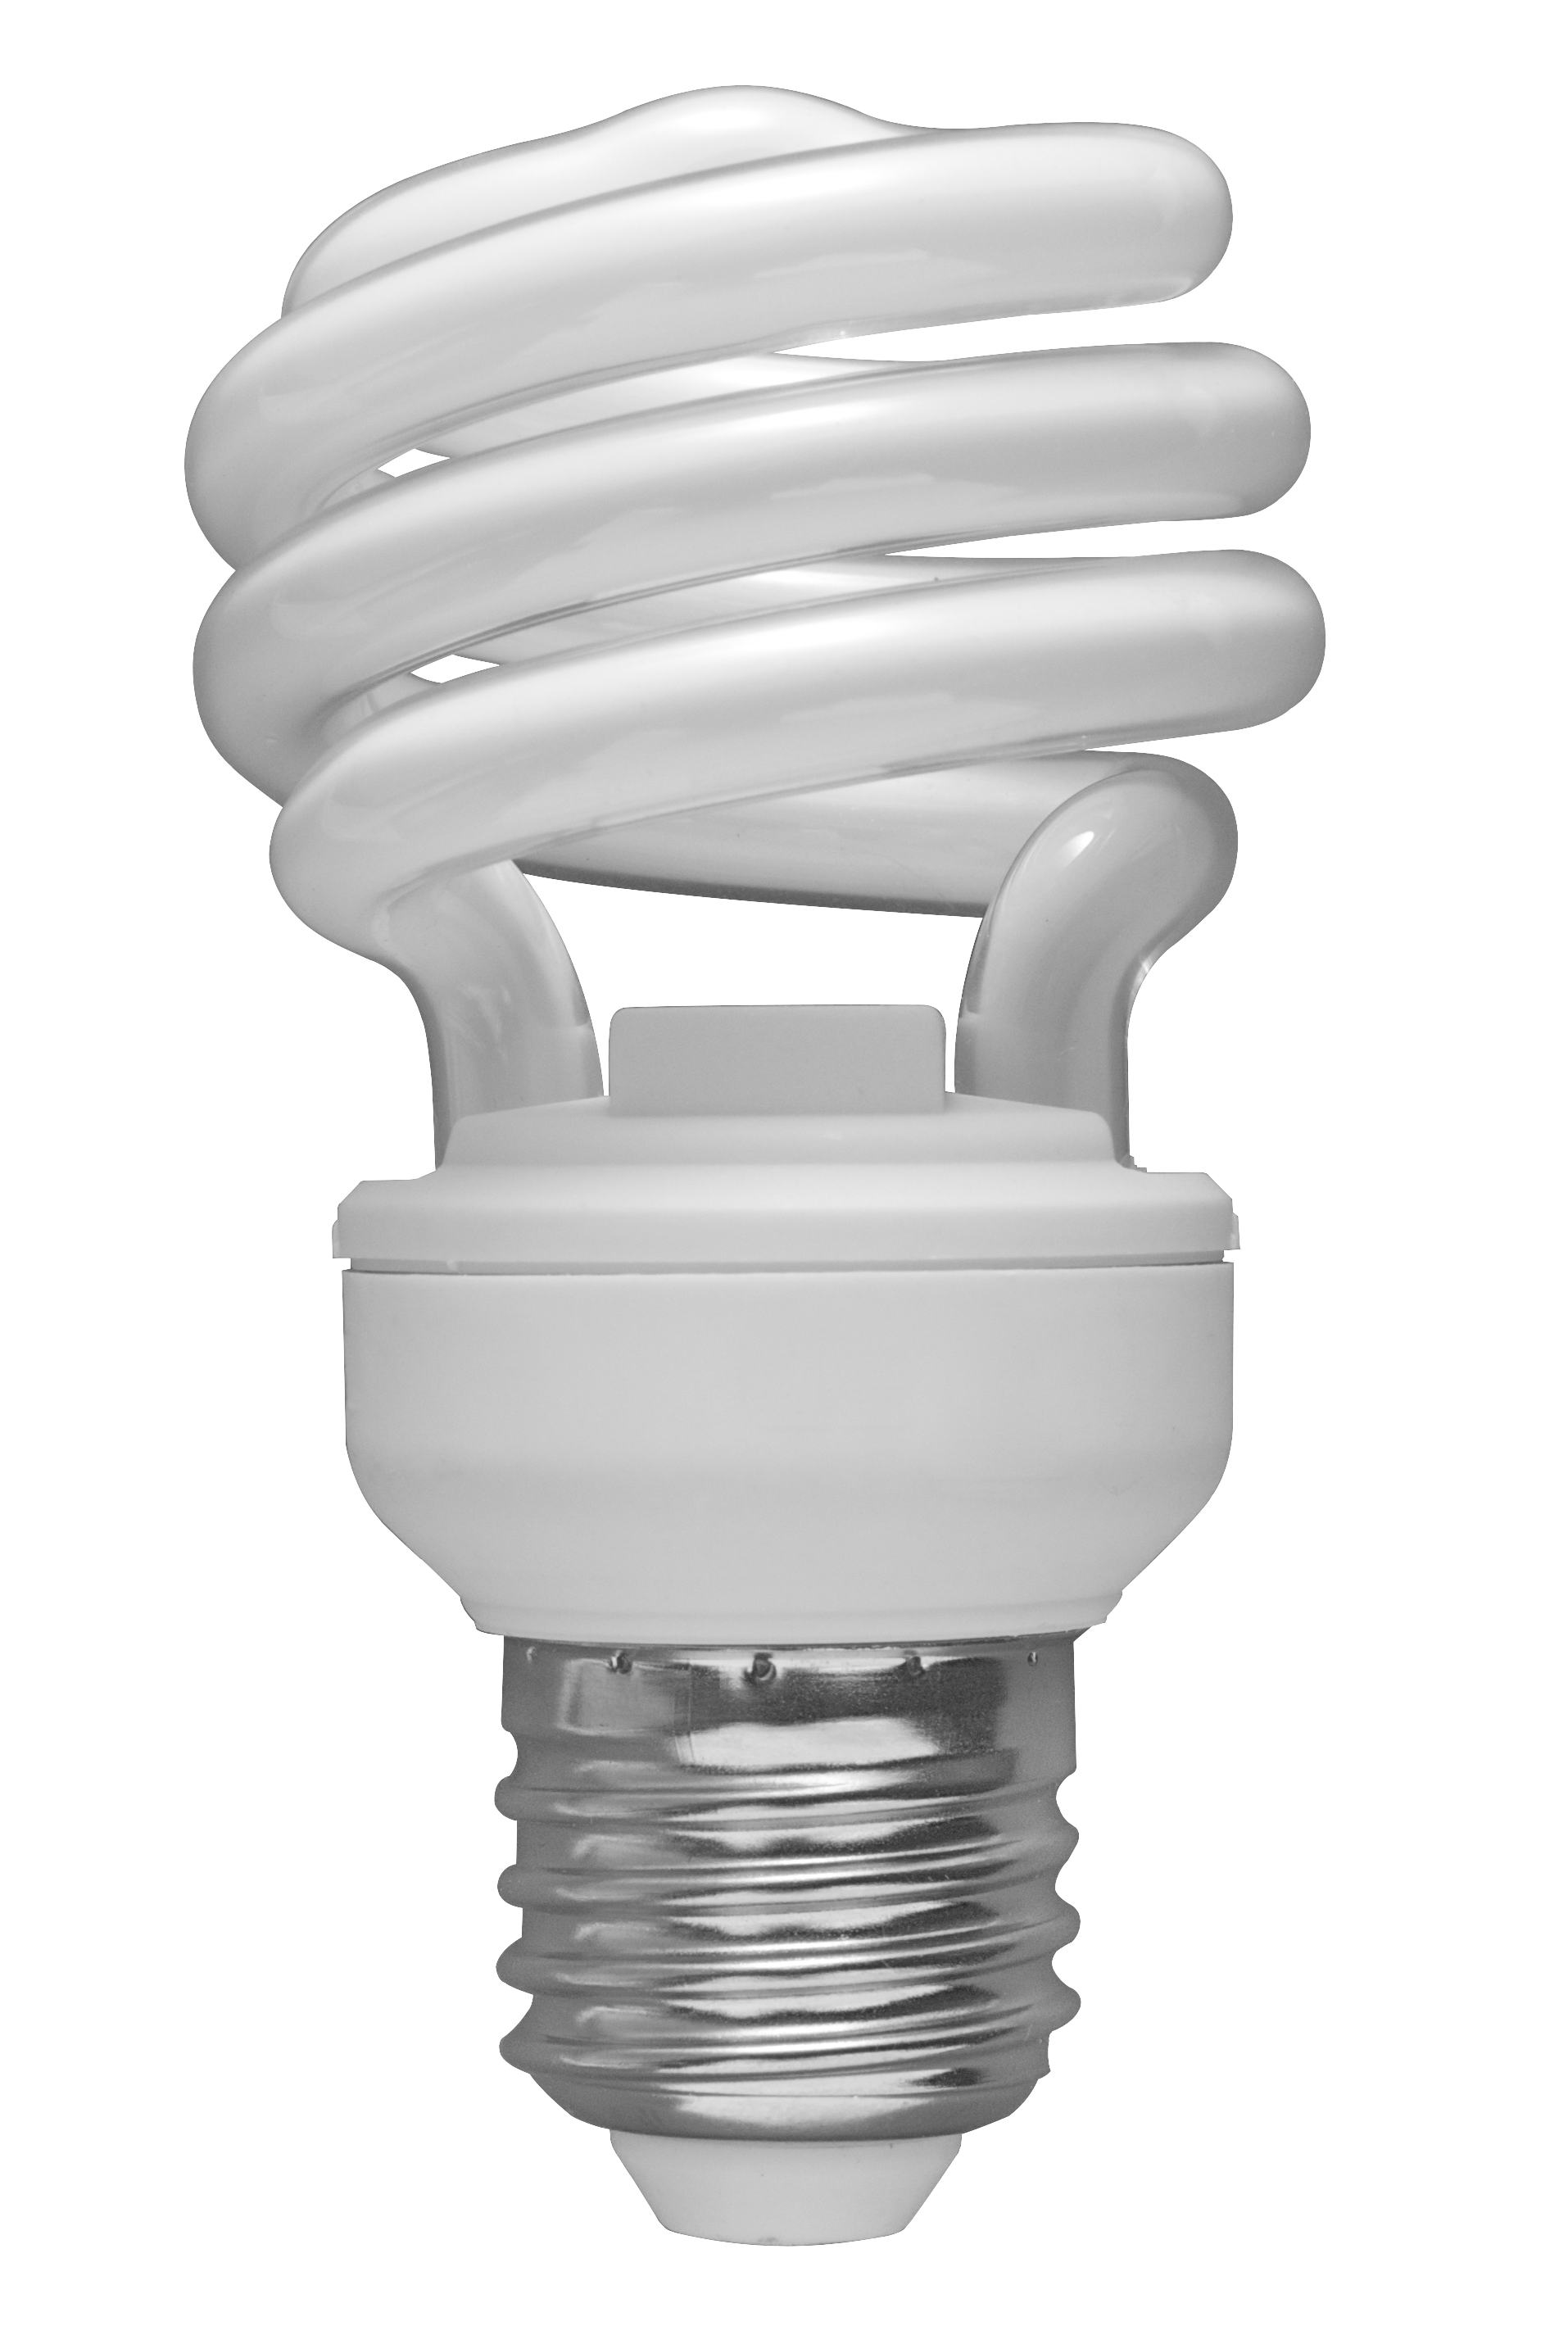 white day light Bulb PNG images Download 